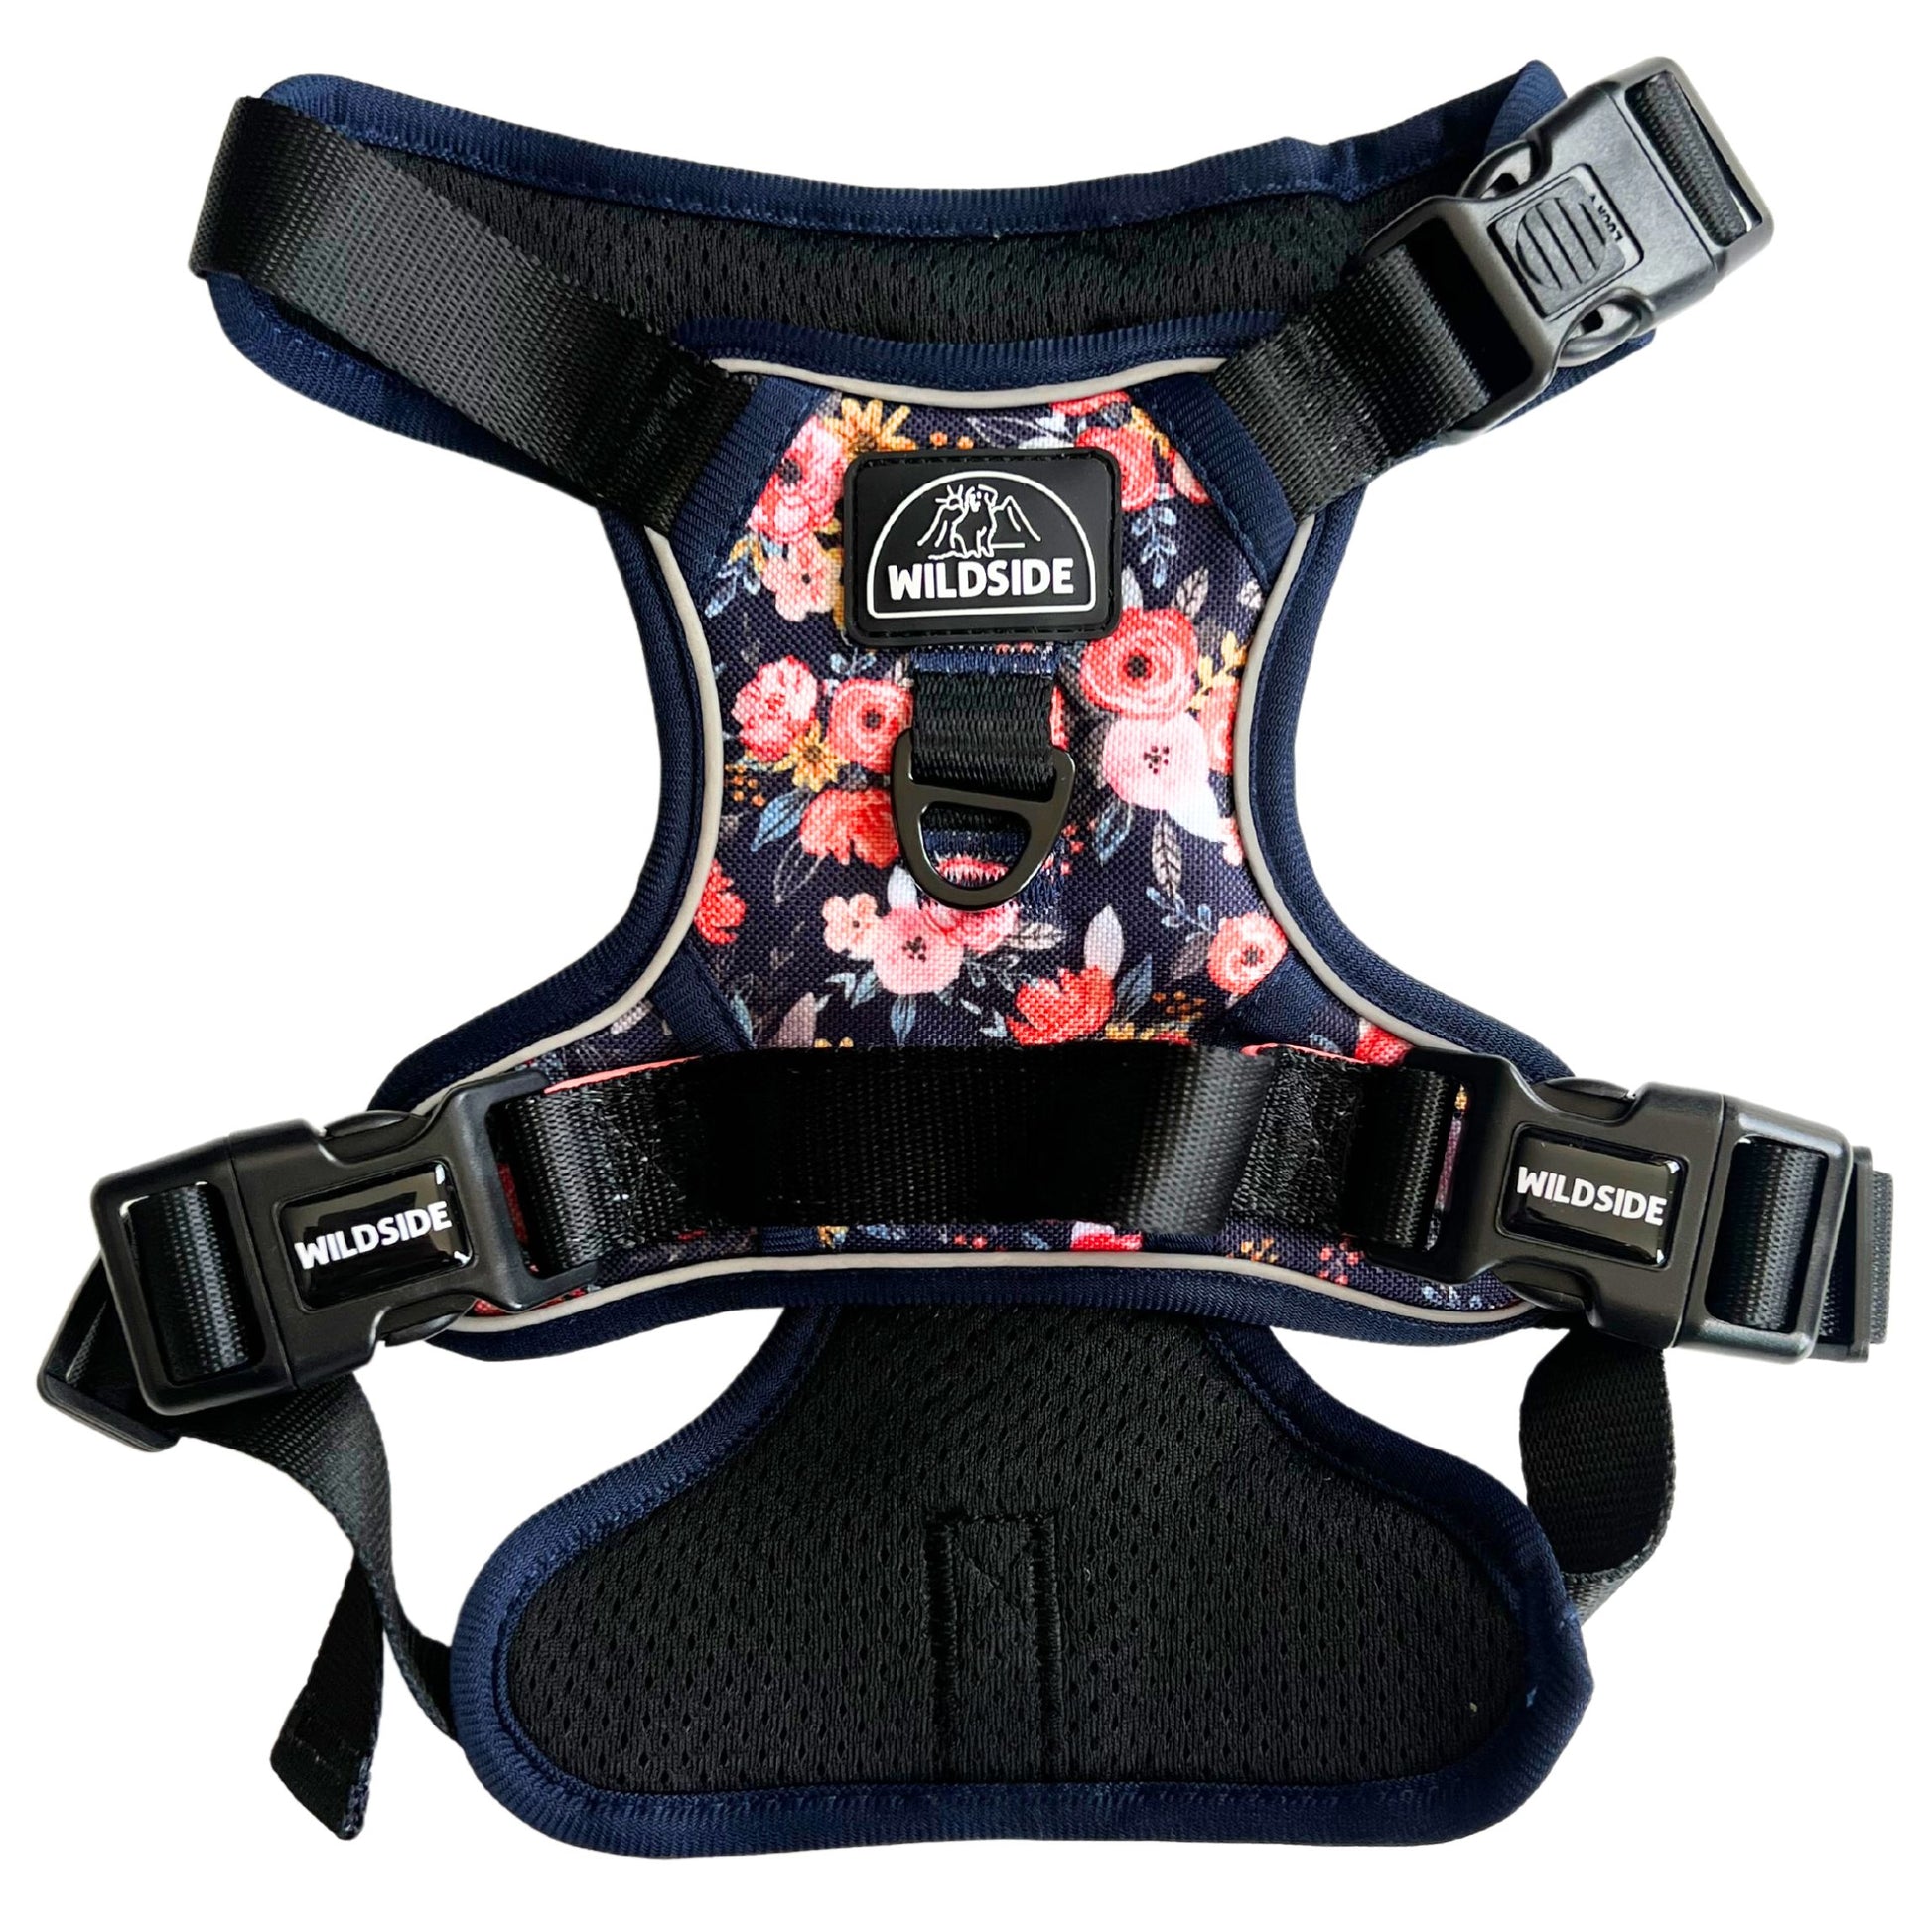 how dog harness should fit, how does dog harness go on, how to use dog harness, what dog harness is best to stop pulling, no pull dog harness, no slip over the head harness, dog harness for large dogs, dog harness with handle, durable dog harness, front clip dog harness, ruffwear dog harness, flower dog harness, puppy dog harness, front harness vs back harness